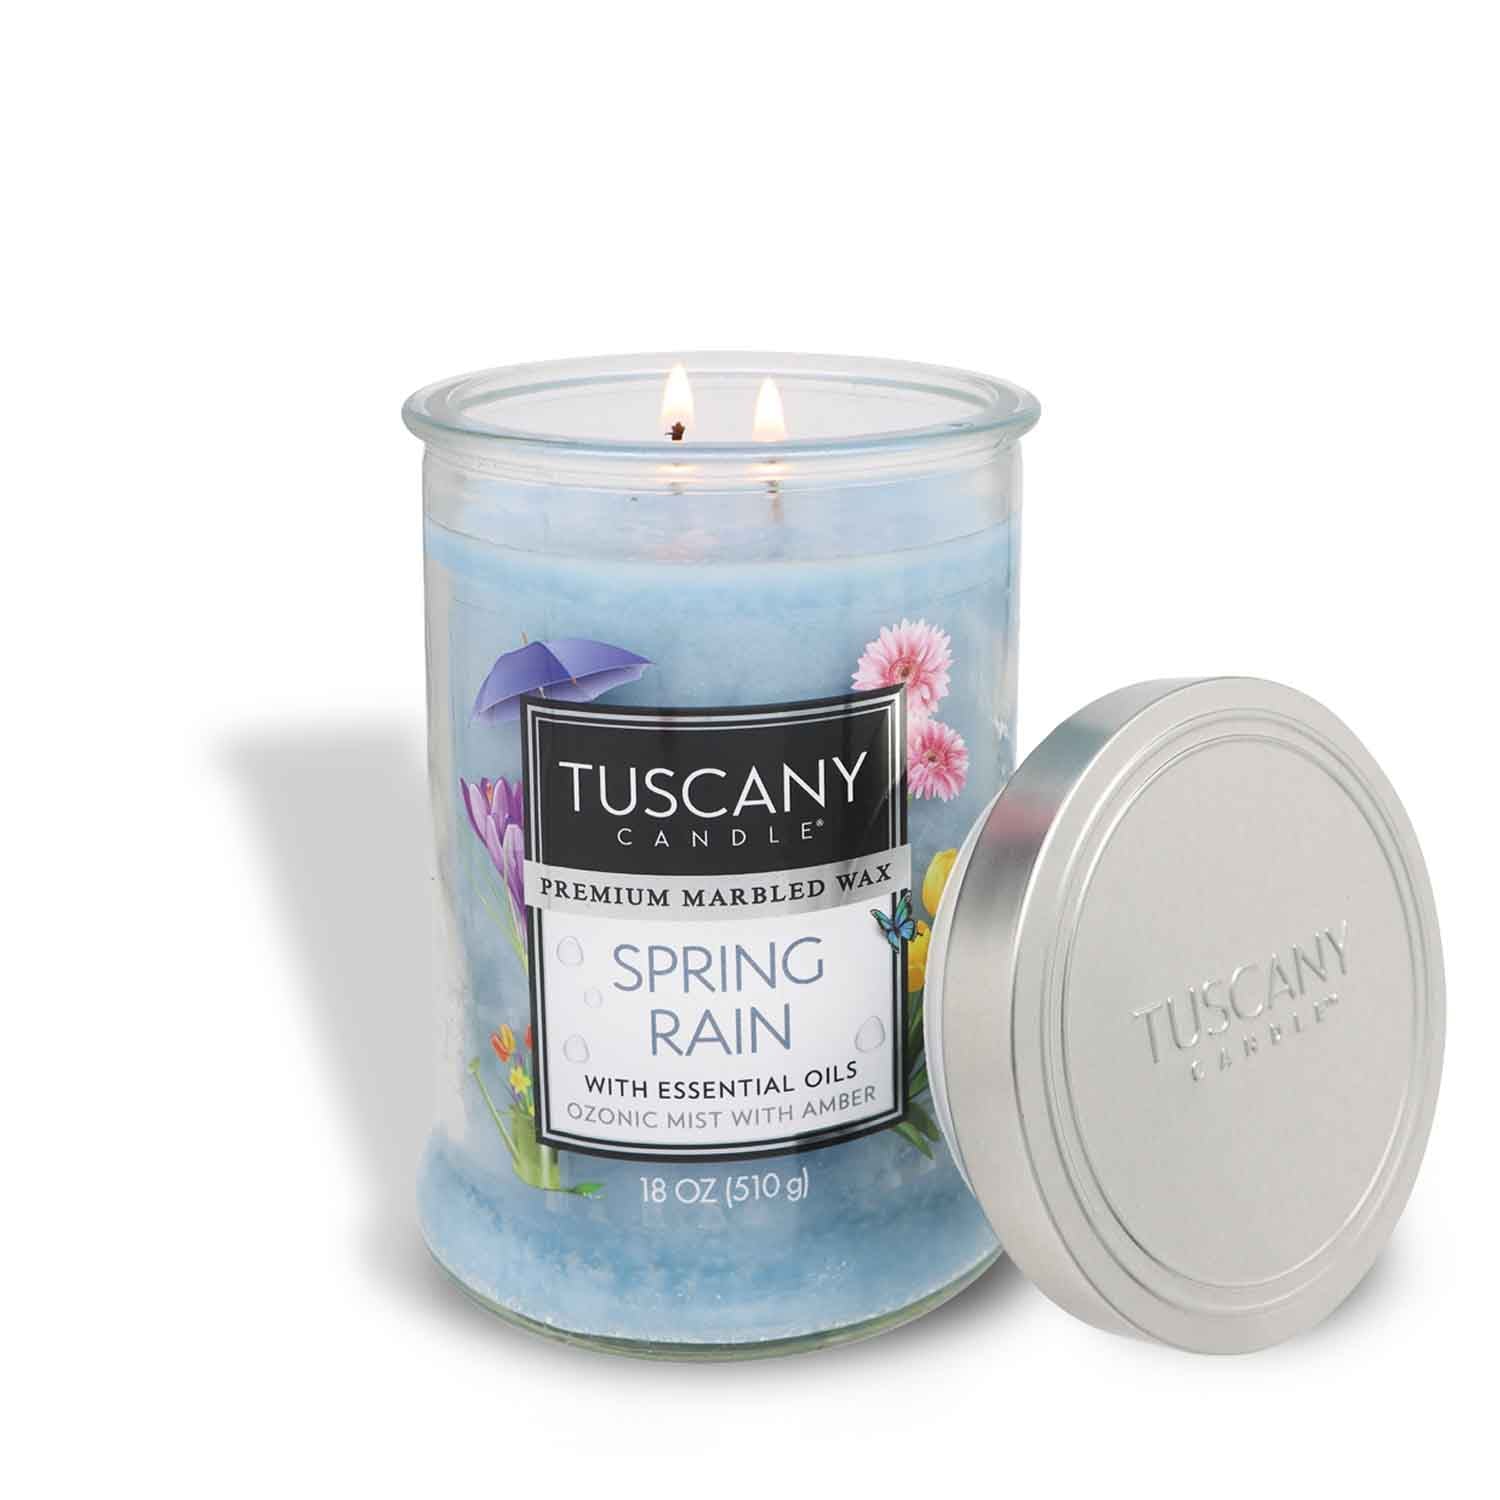 Spring rain - one of our favorite fresh-scented candles